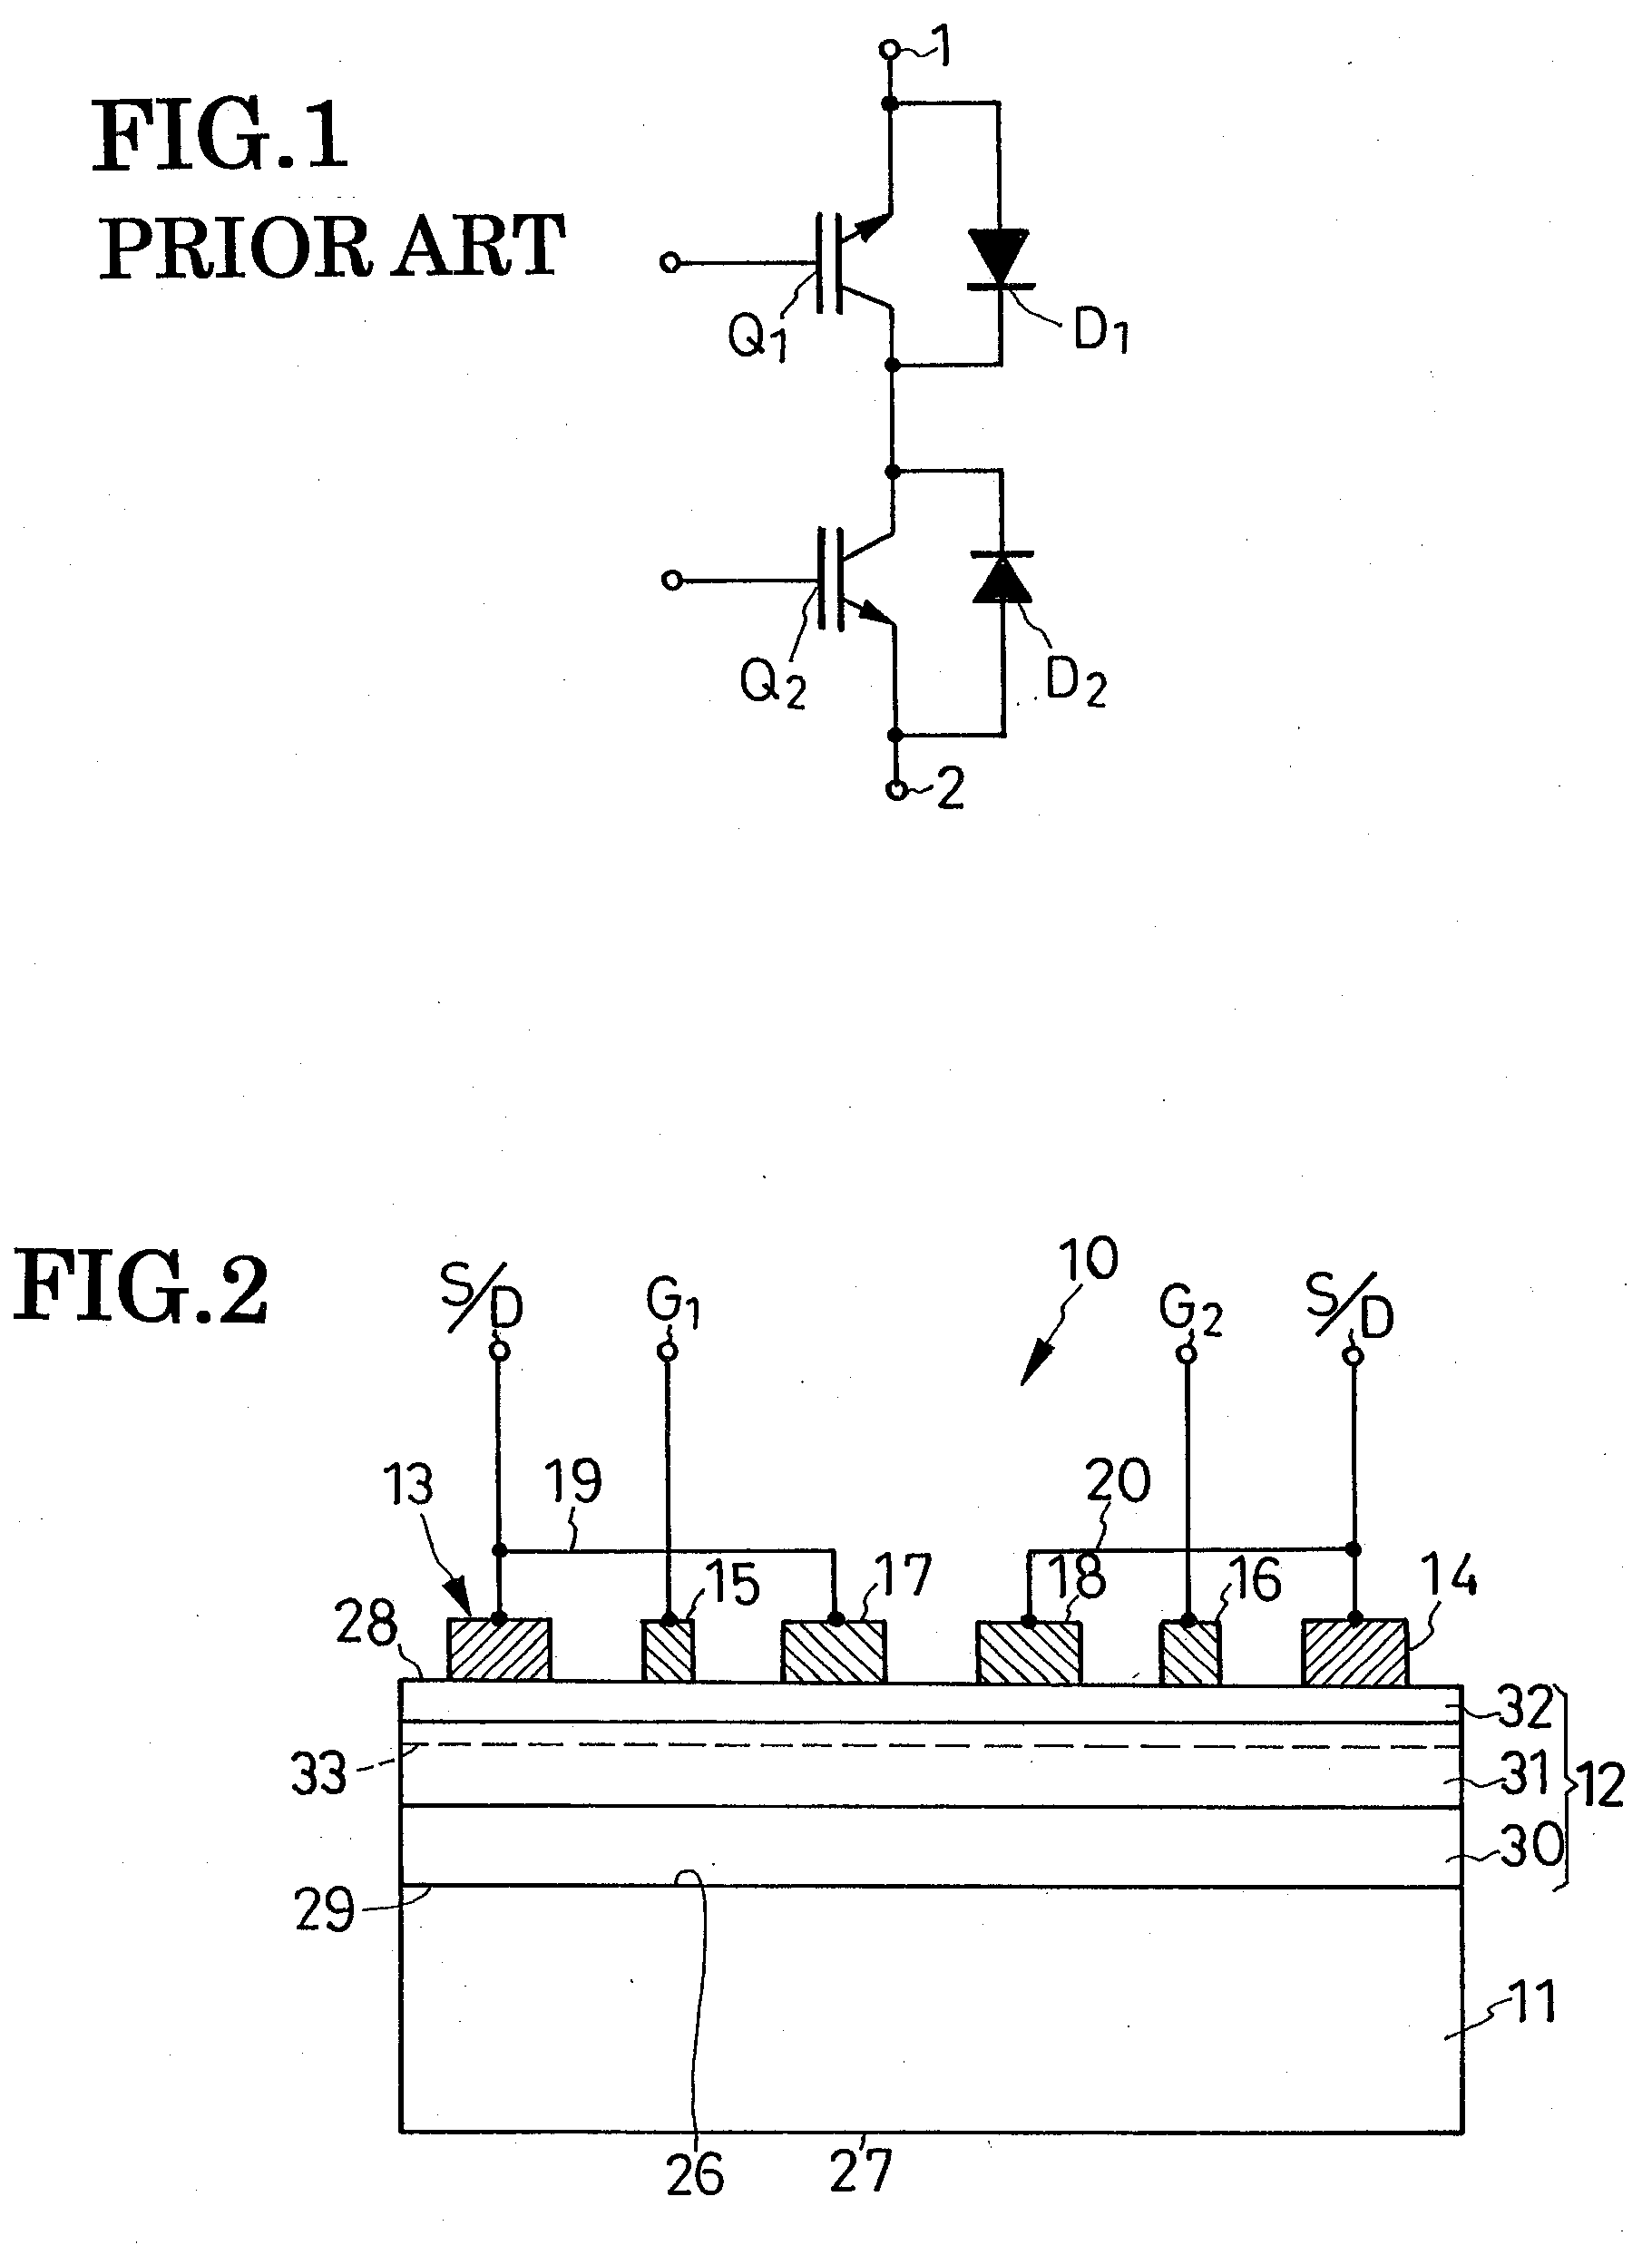 Solid-state switch capable of bidirectional operation